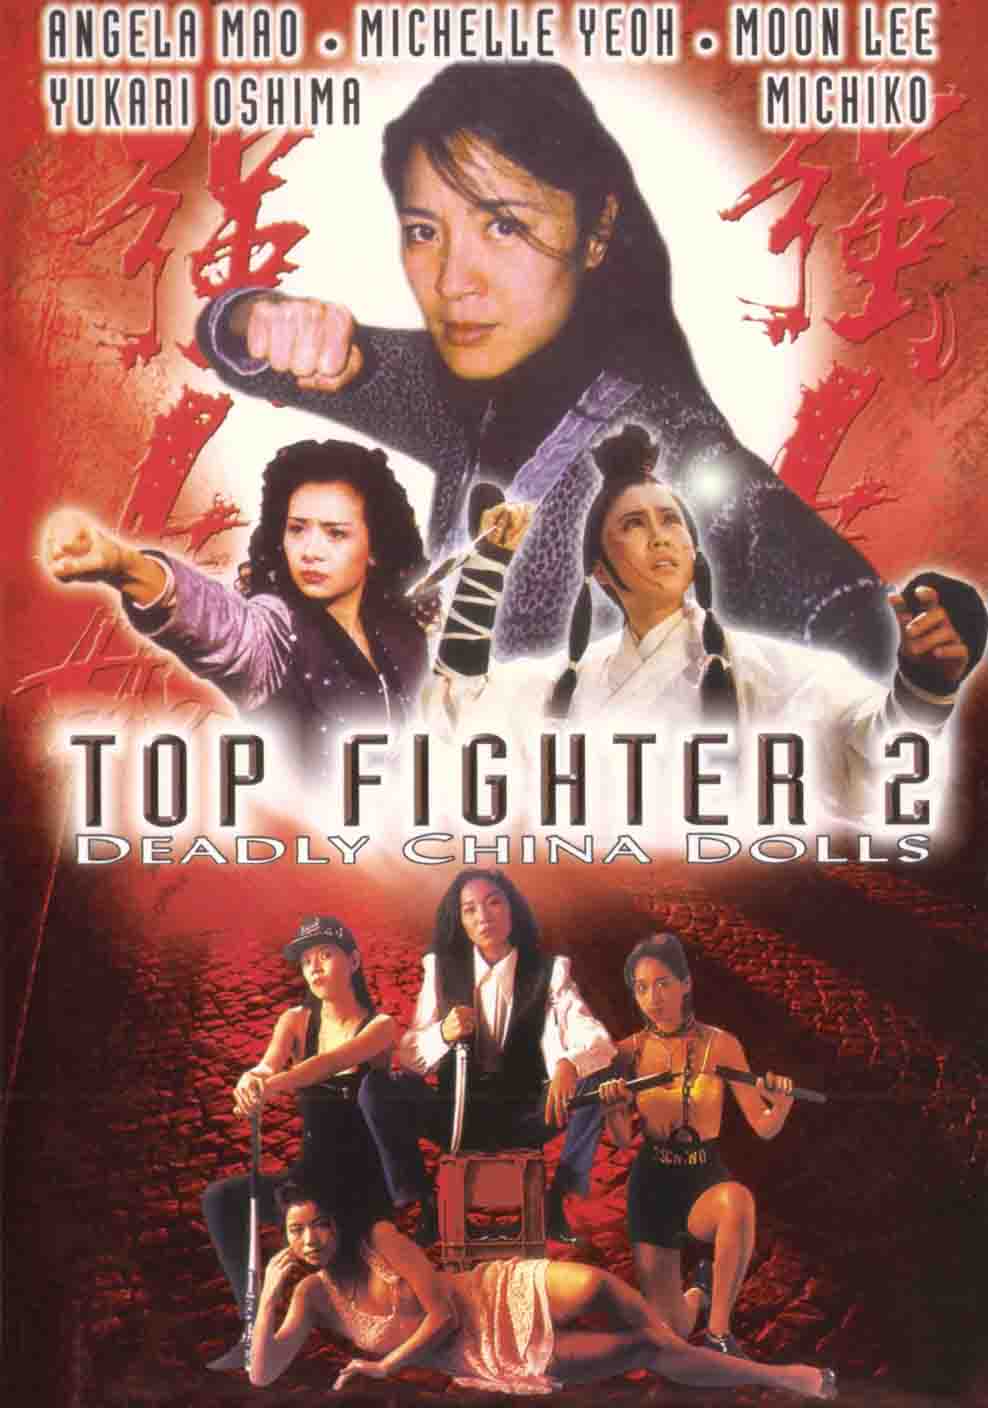 TOP FIGHTER 2